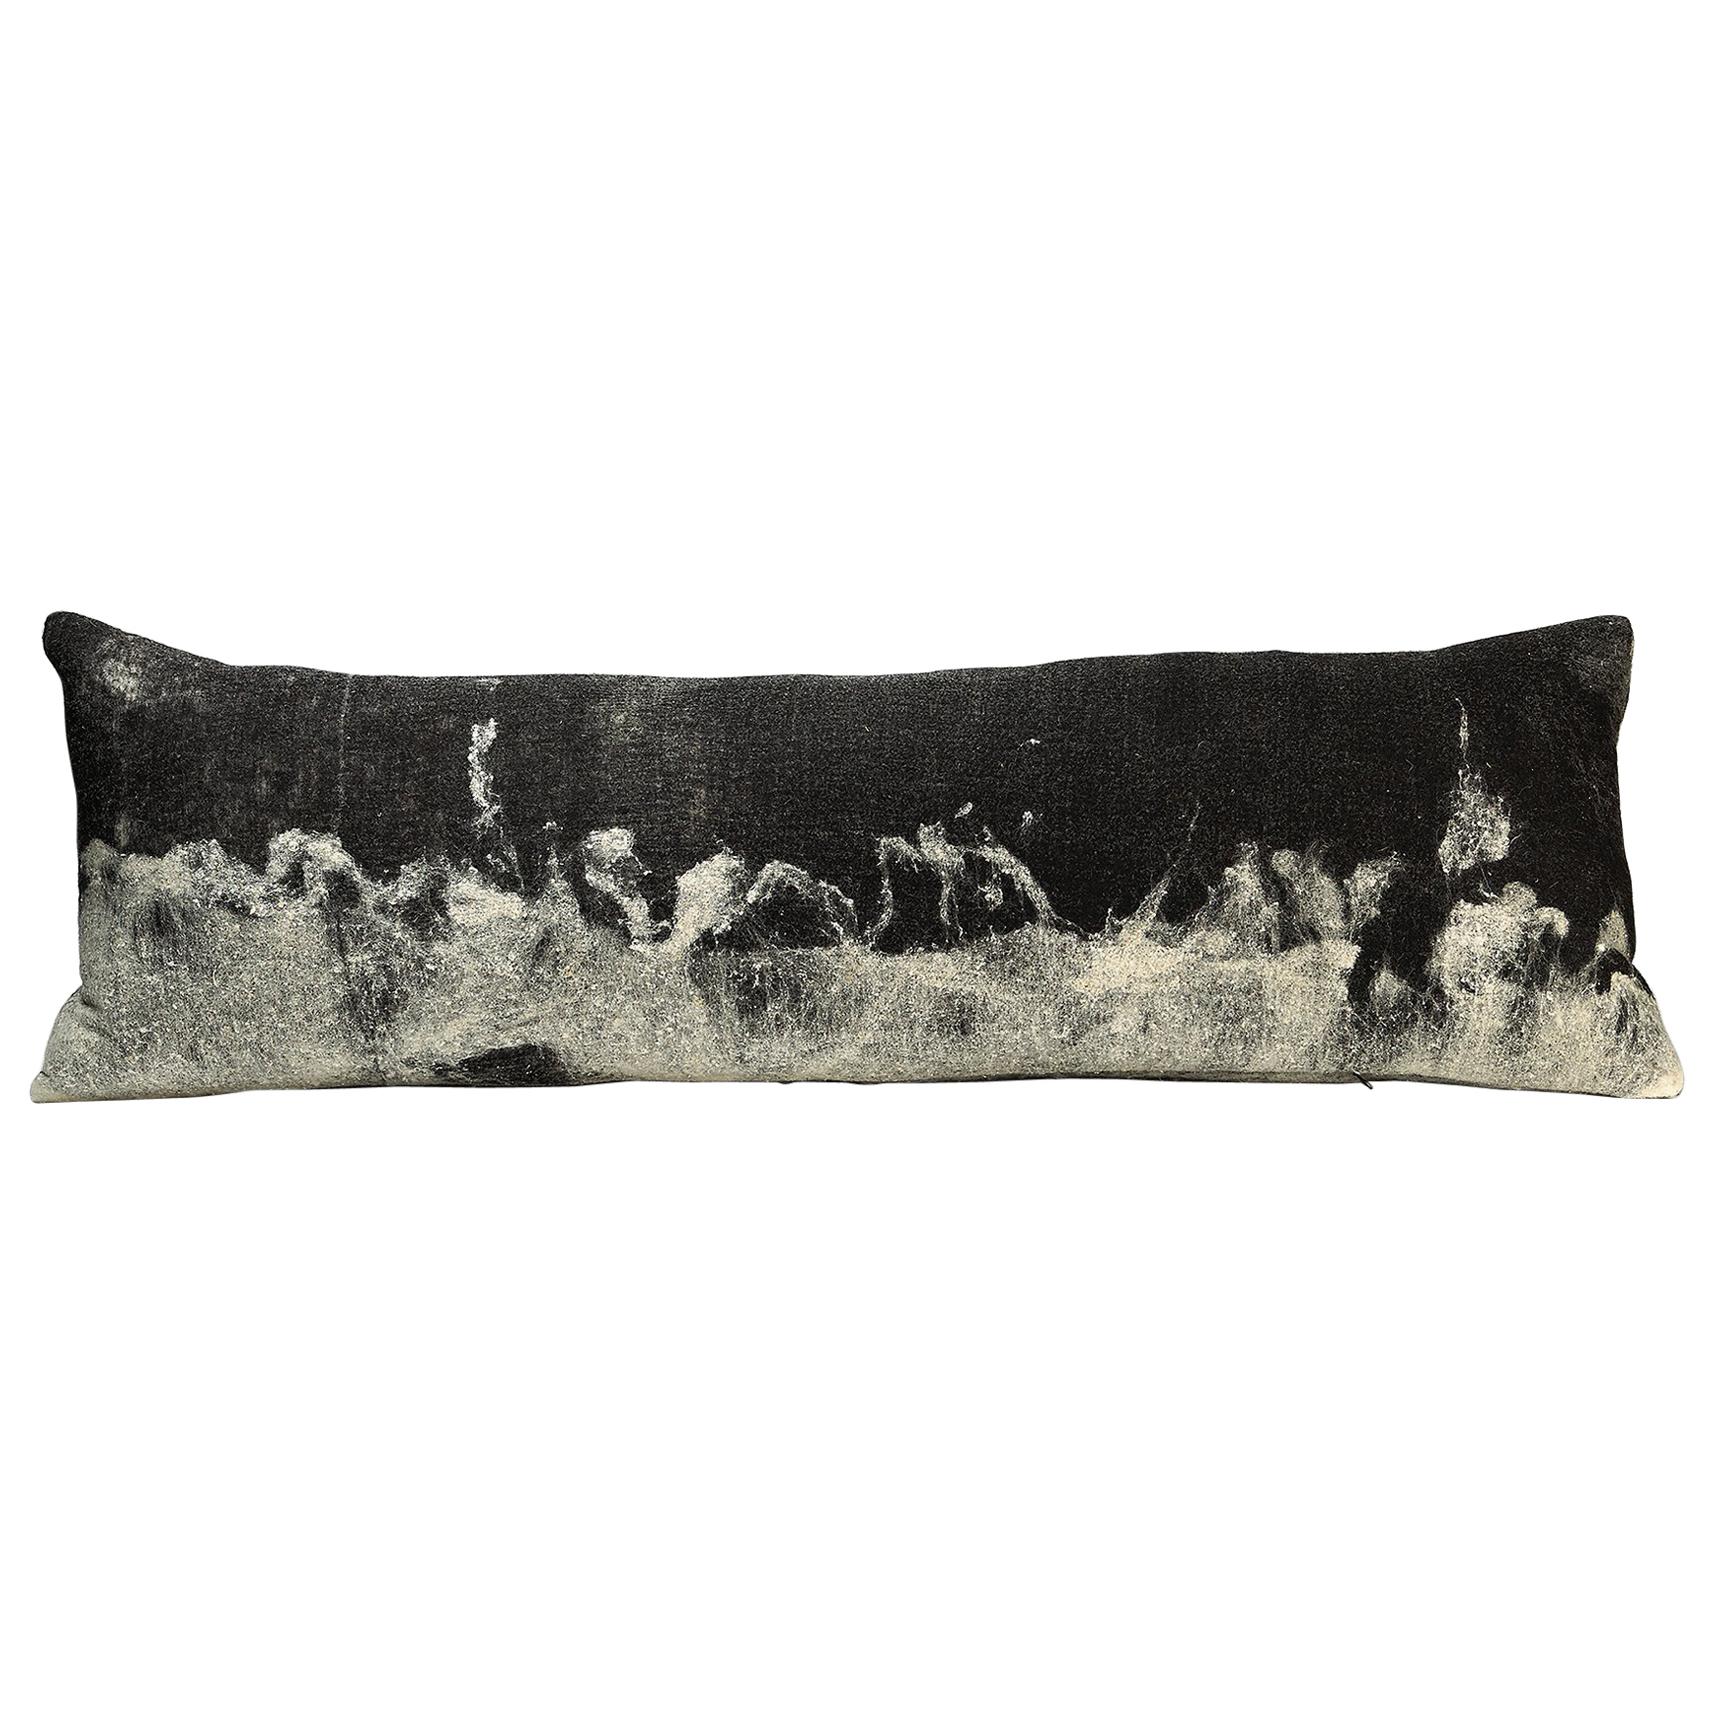 Modern Rustic Wool "Genesis" Body Pillow Hand-Milled For Sale